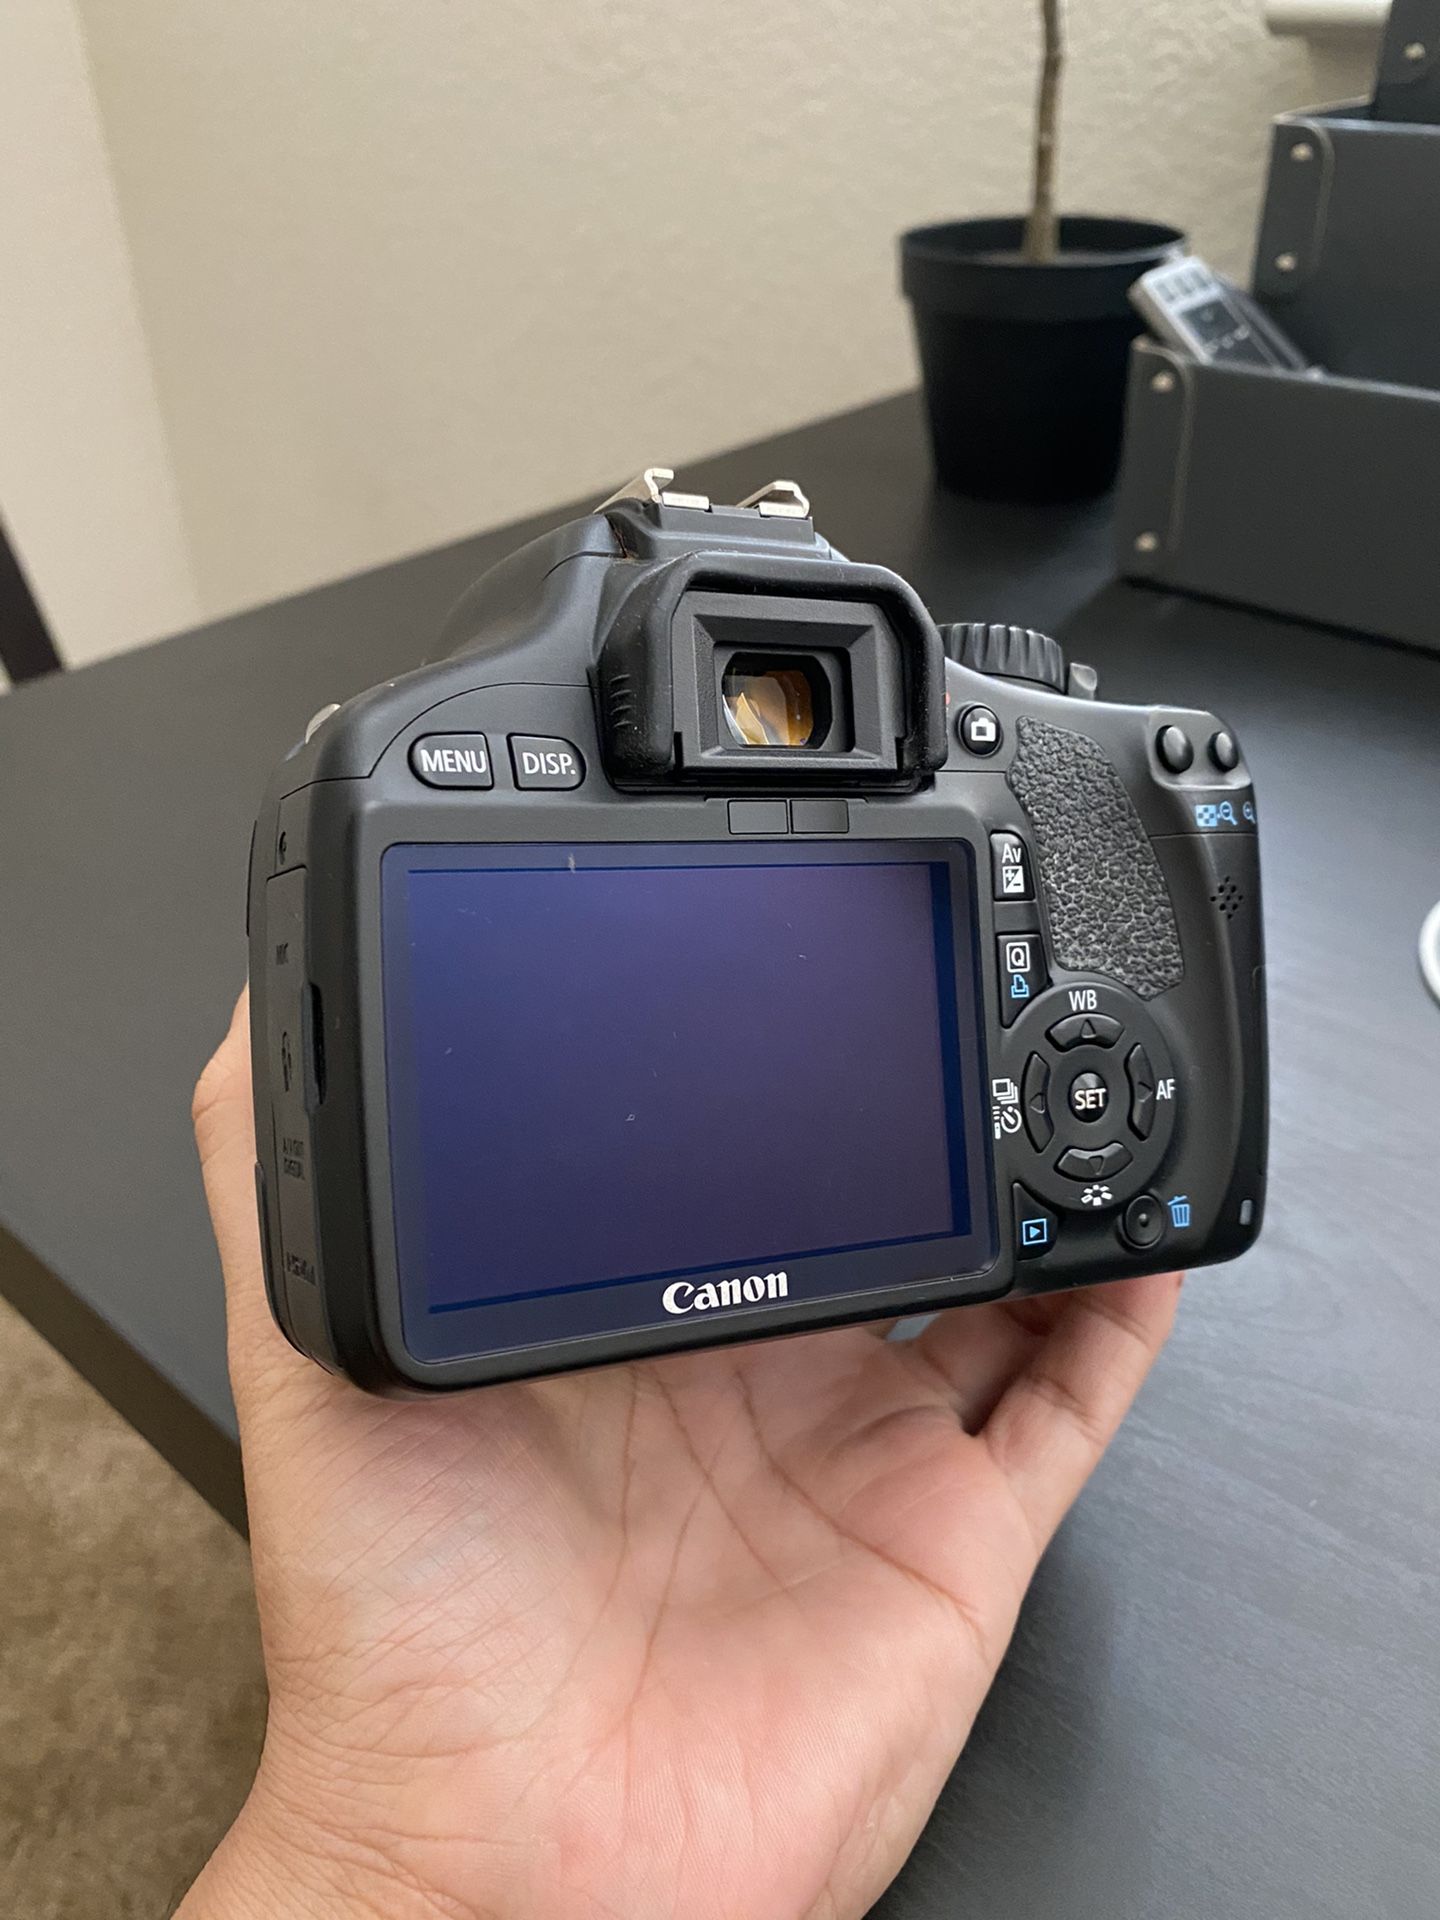 Canon T2i with 18-55mm kit lens